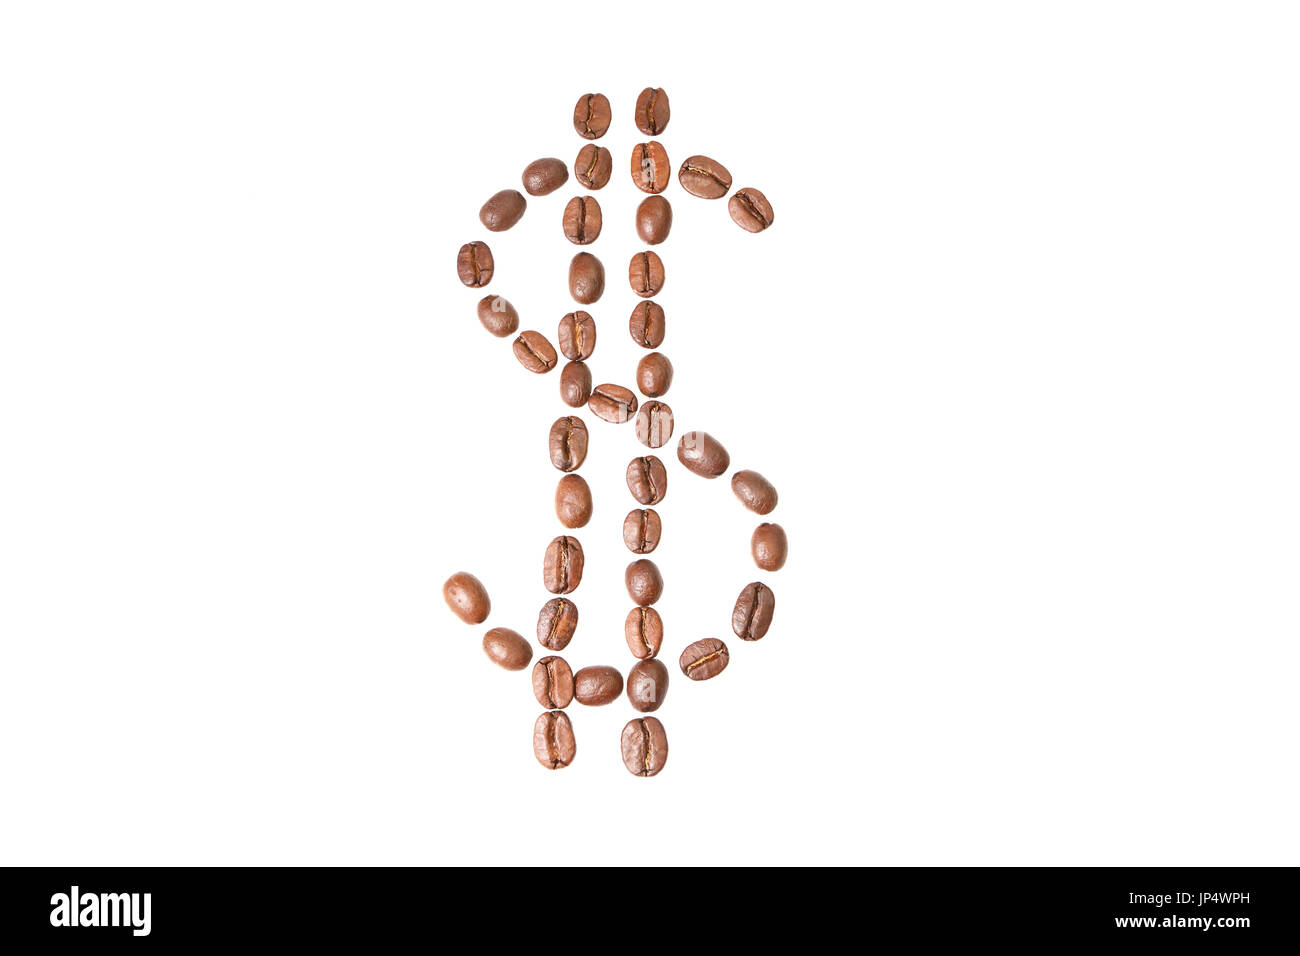 Dollar sign made of coffee beans Stock Photo